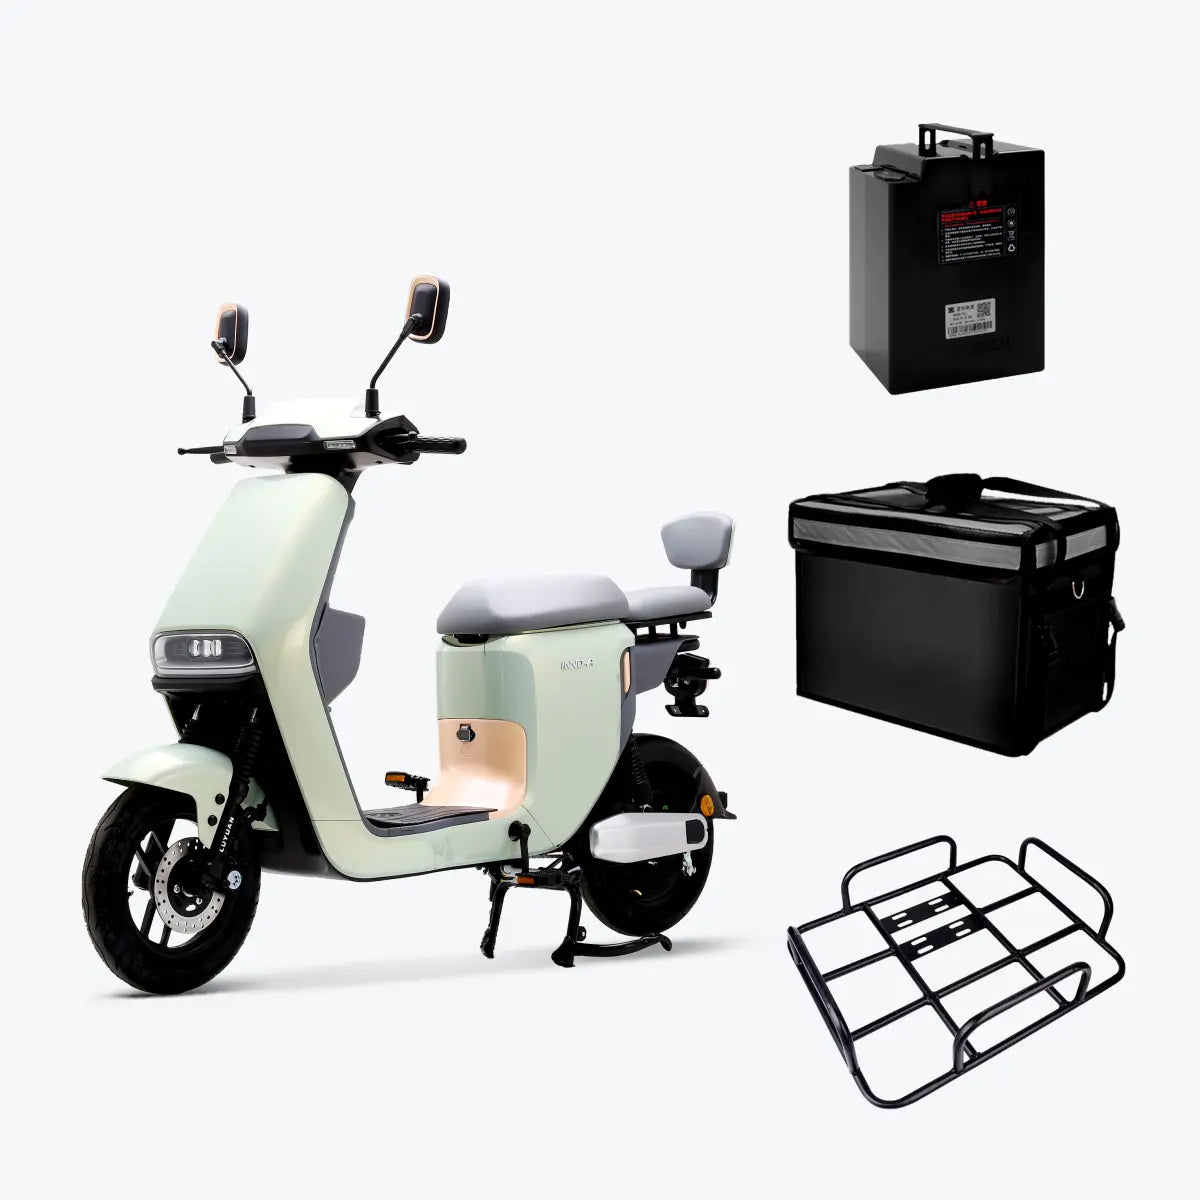 Delivery Moped style Class 2 E-bike Combo | INNO Class 2 Electric Bike + One Additional Battery + Rack + Takeaway Bag